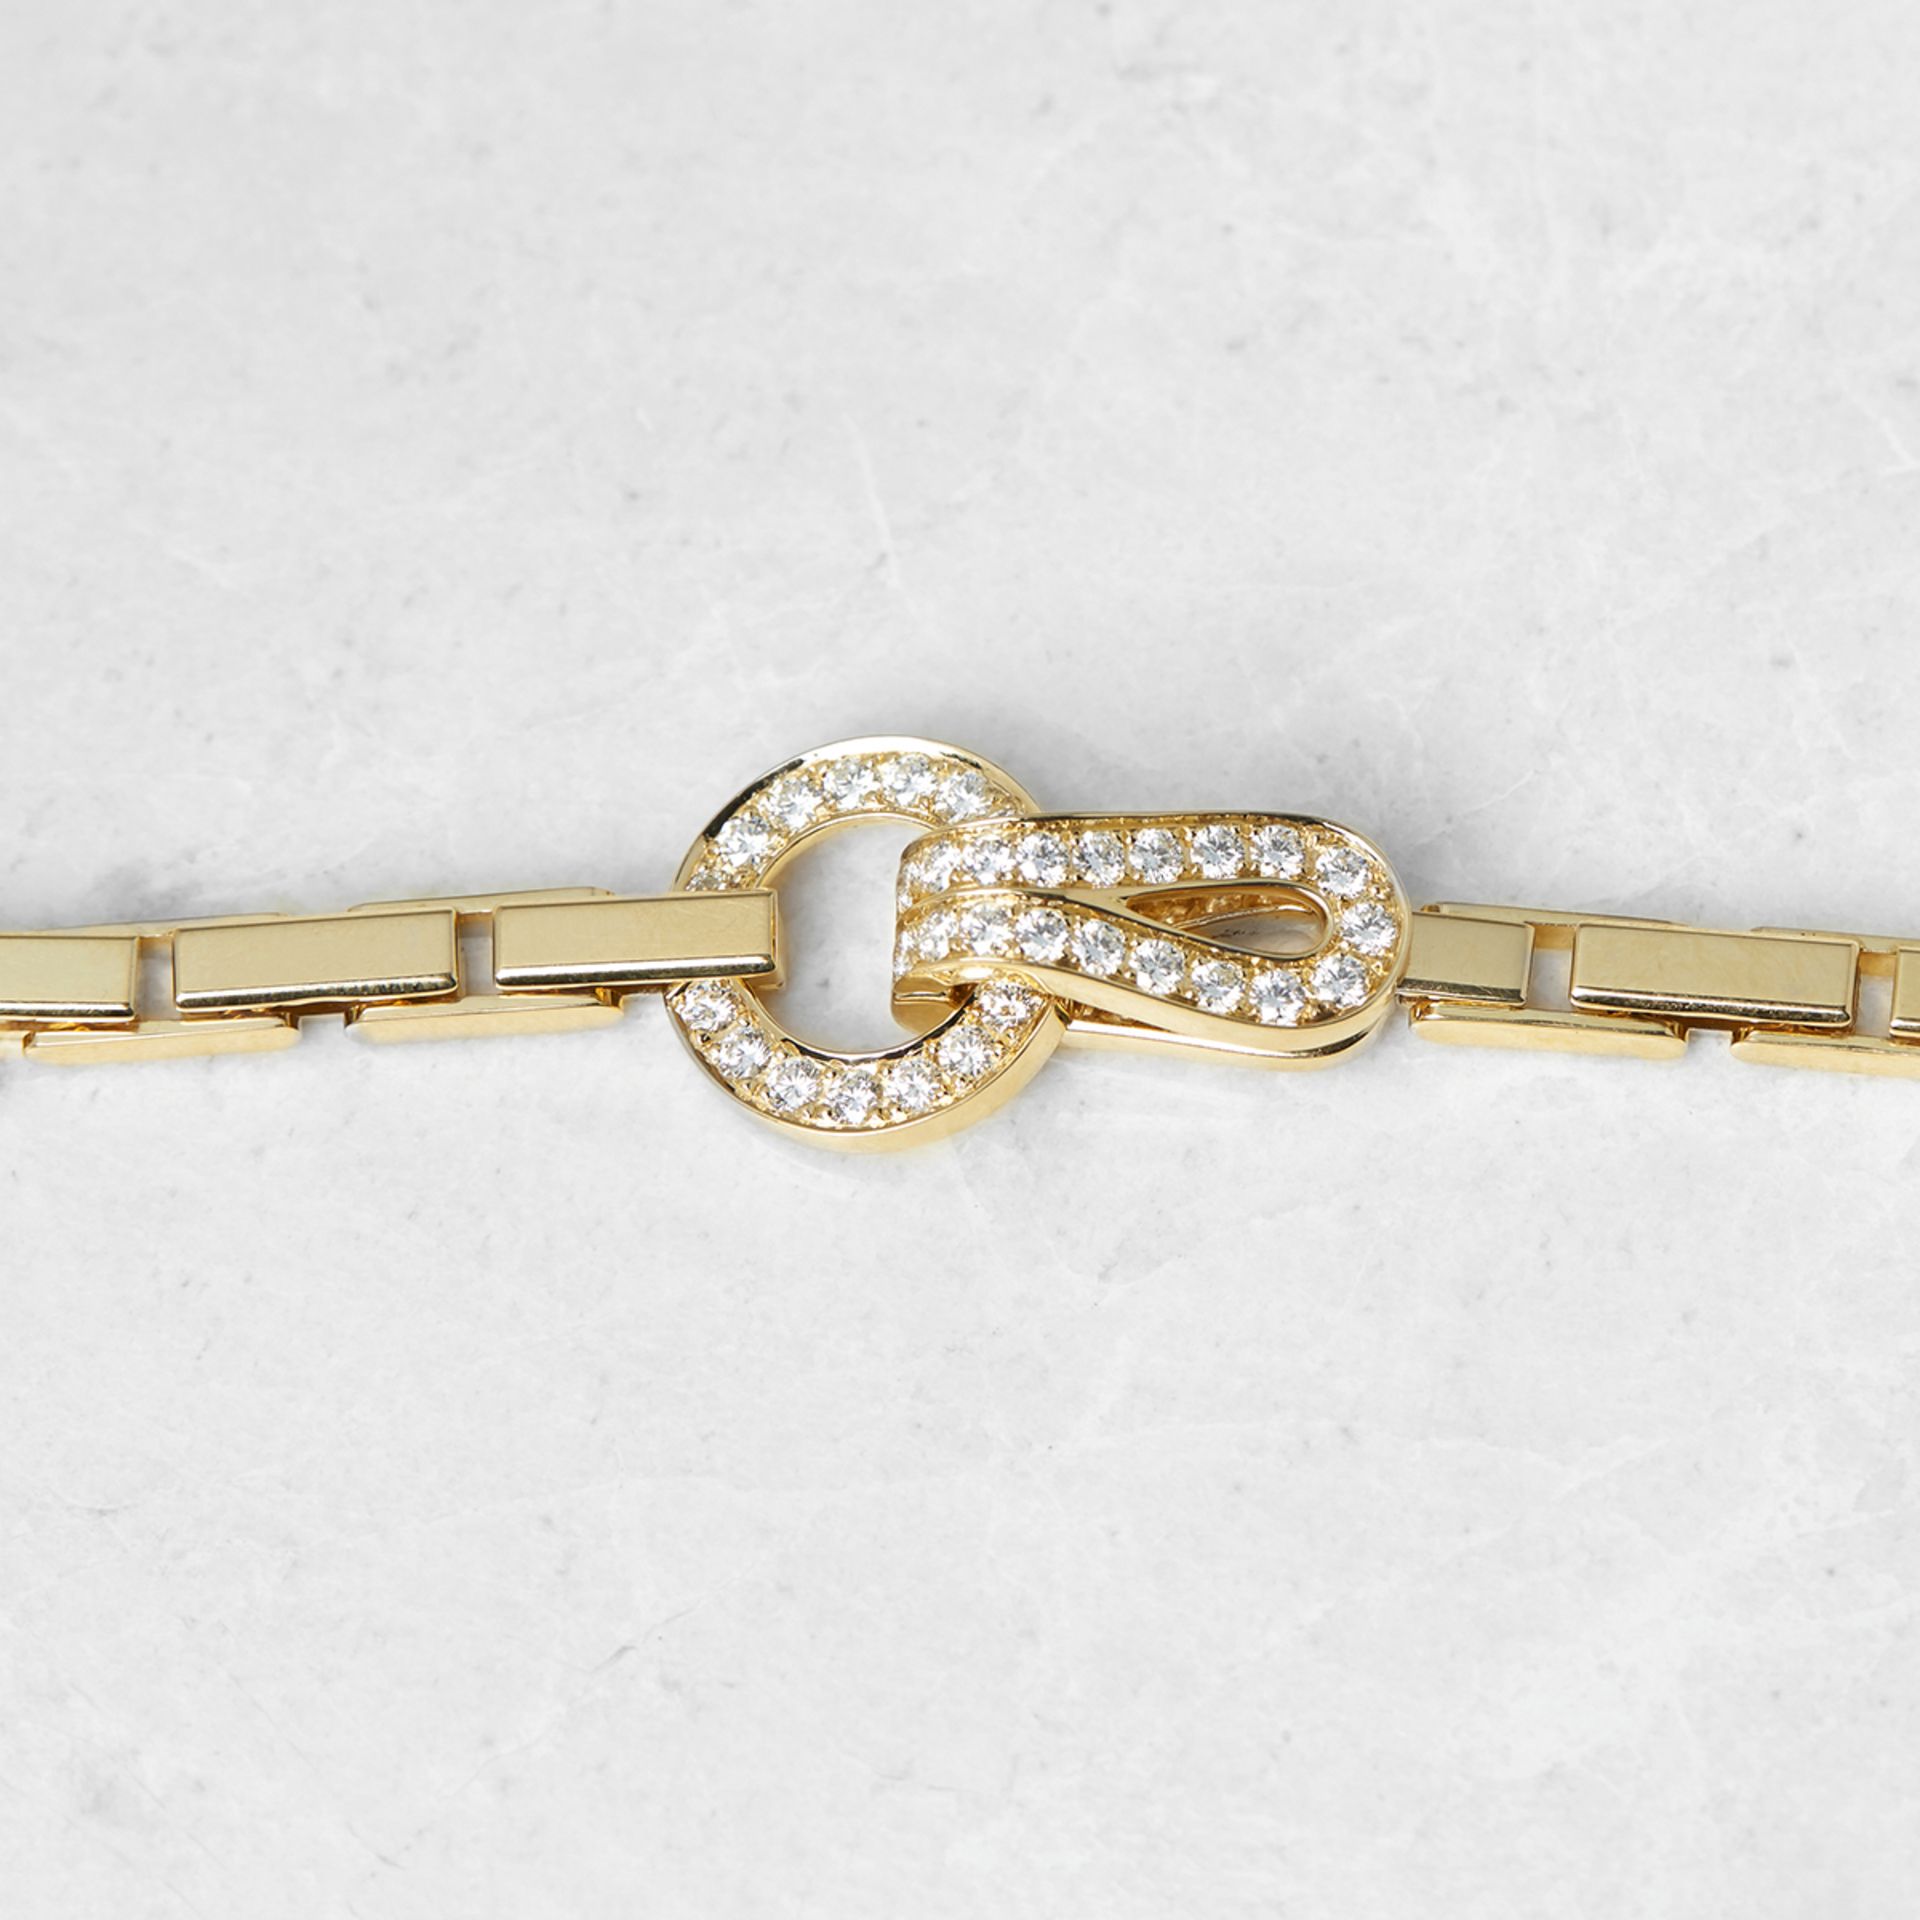 Cartier 18k Yellow Gold Diamond Agrafe Necklace - Image 2 of 5